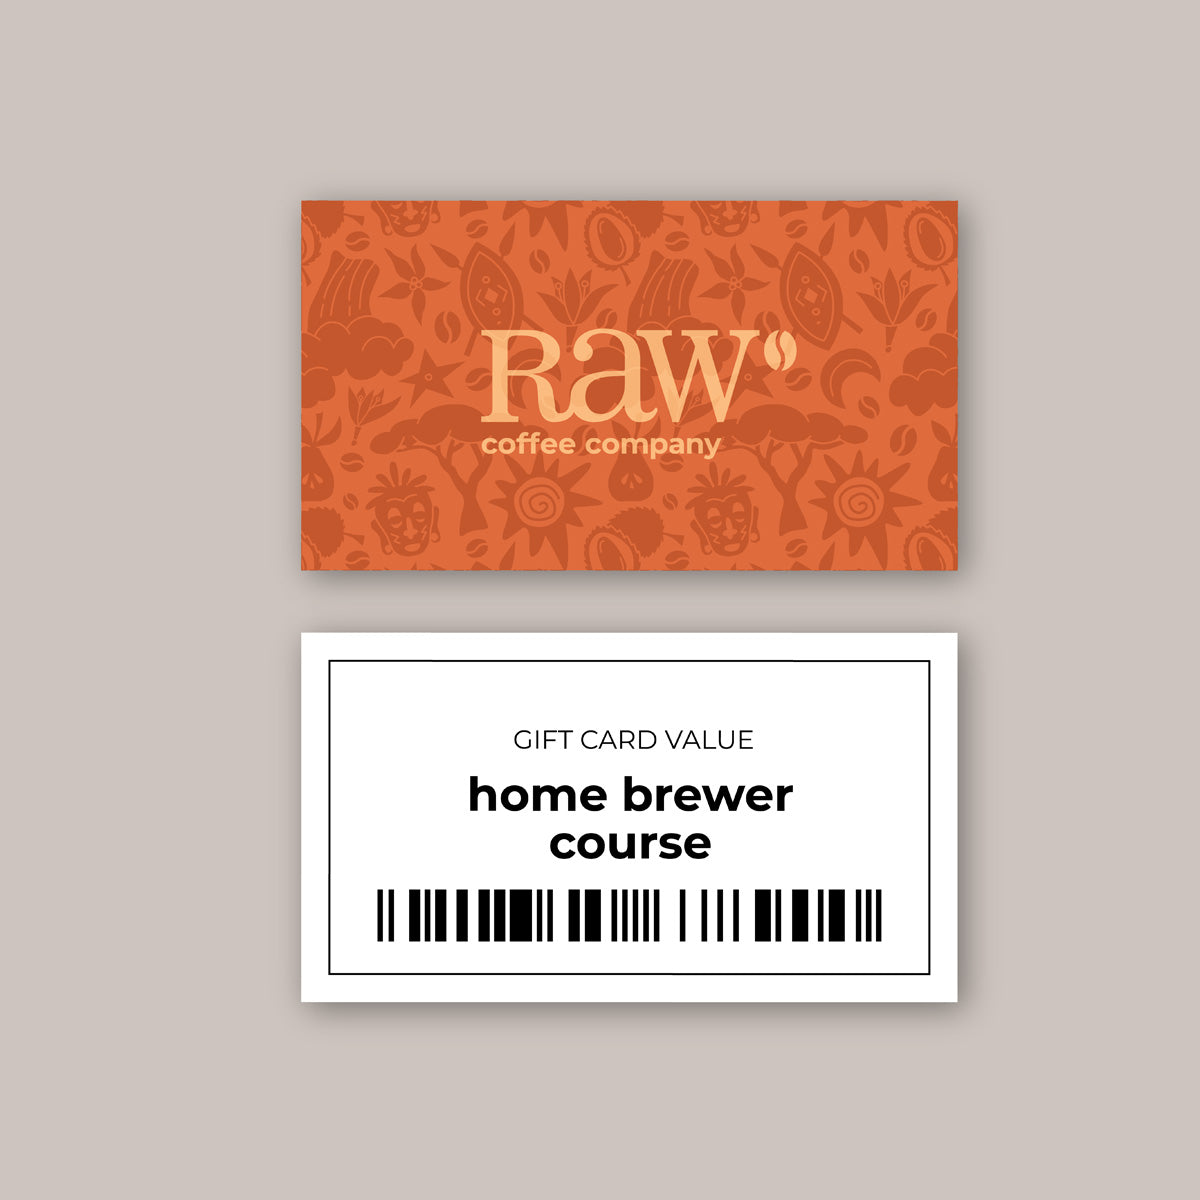 Home-Brewer-Course-Gift-Voucher_RAW-Coffee-Company